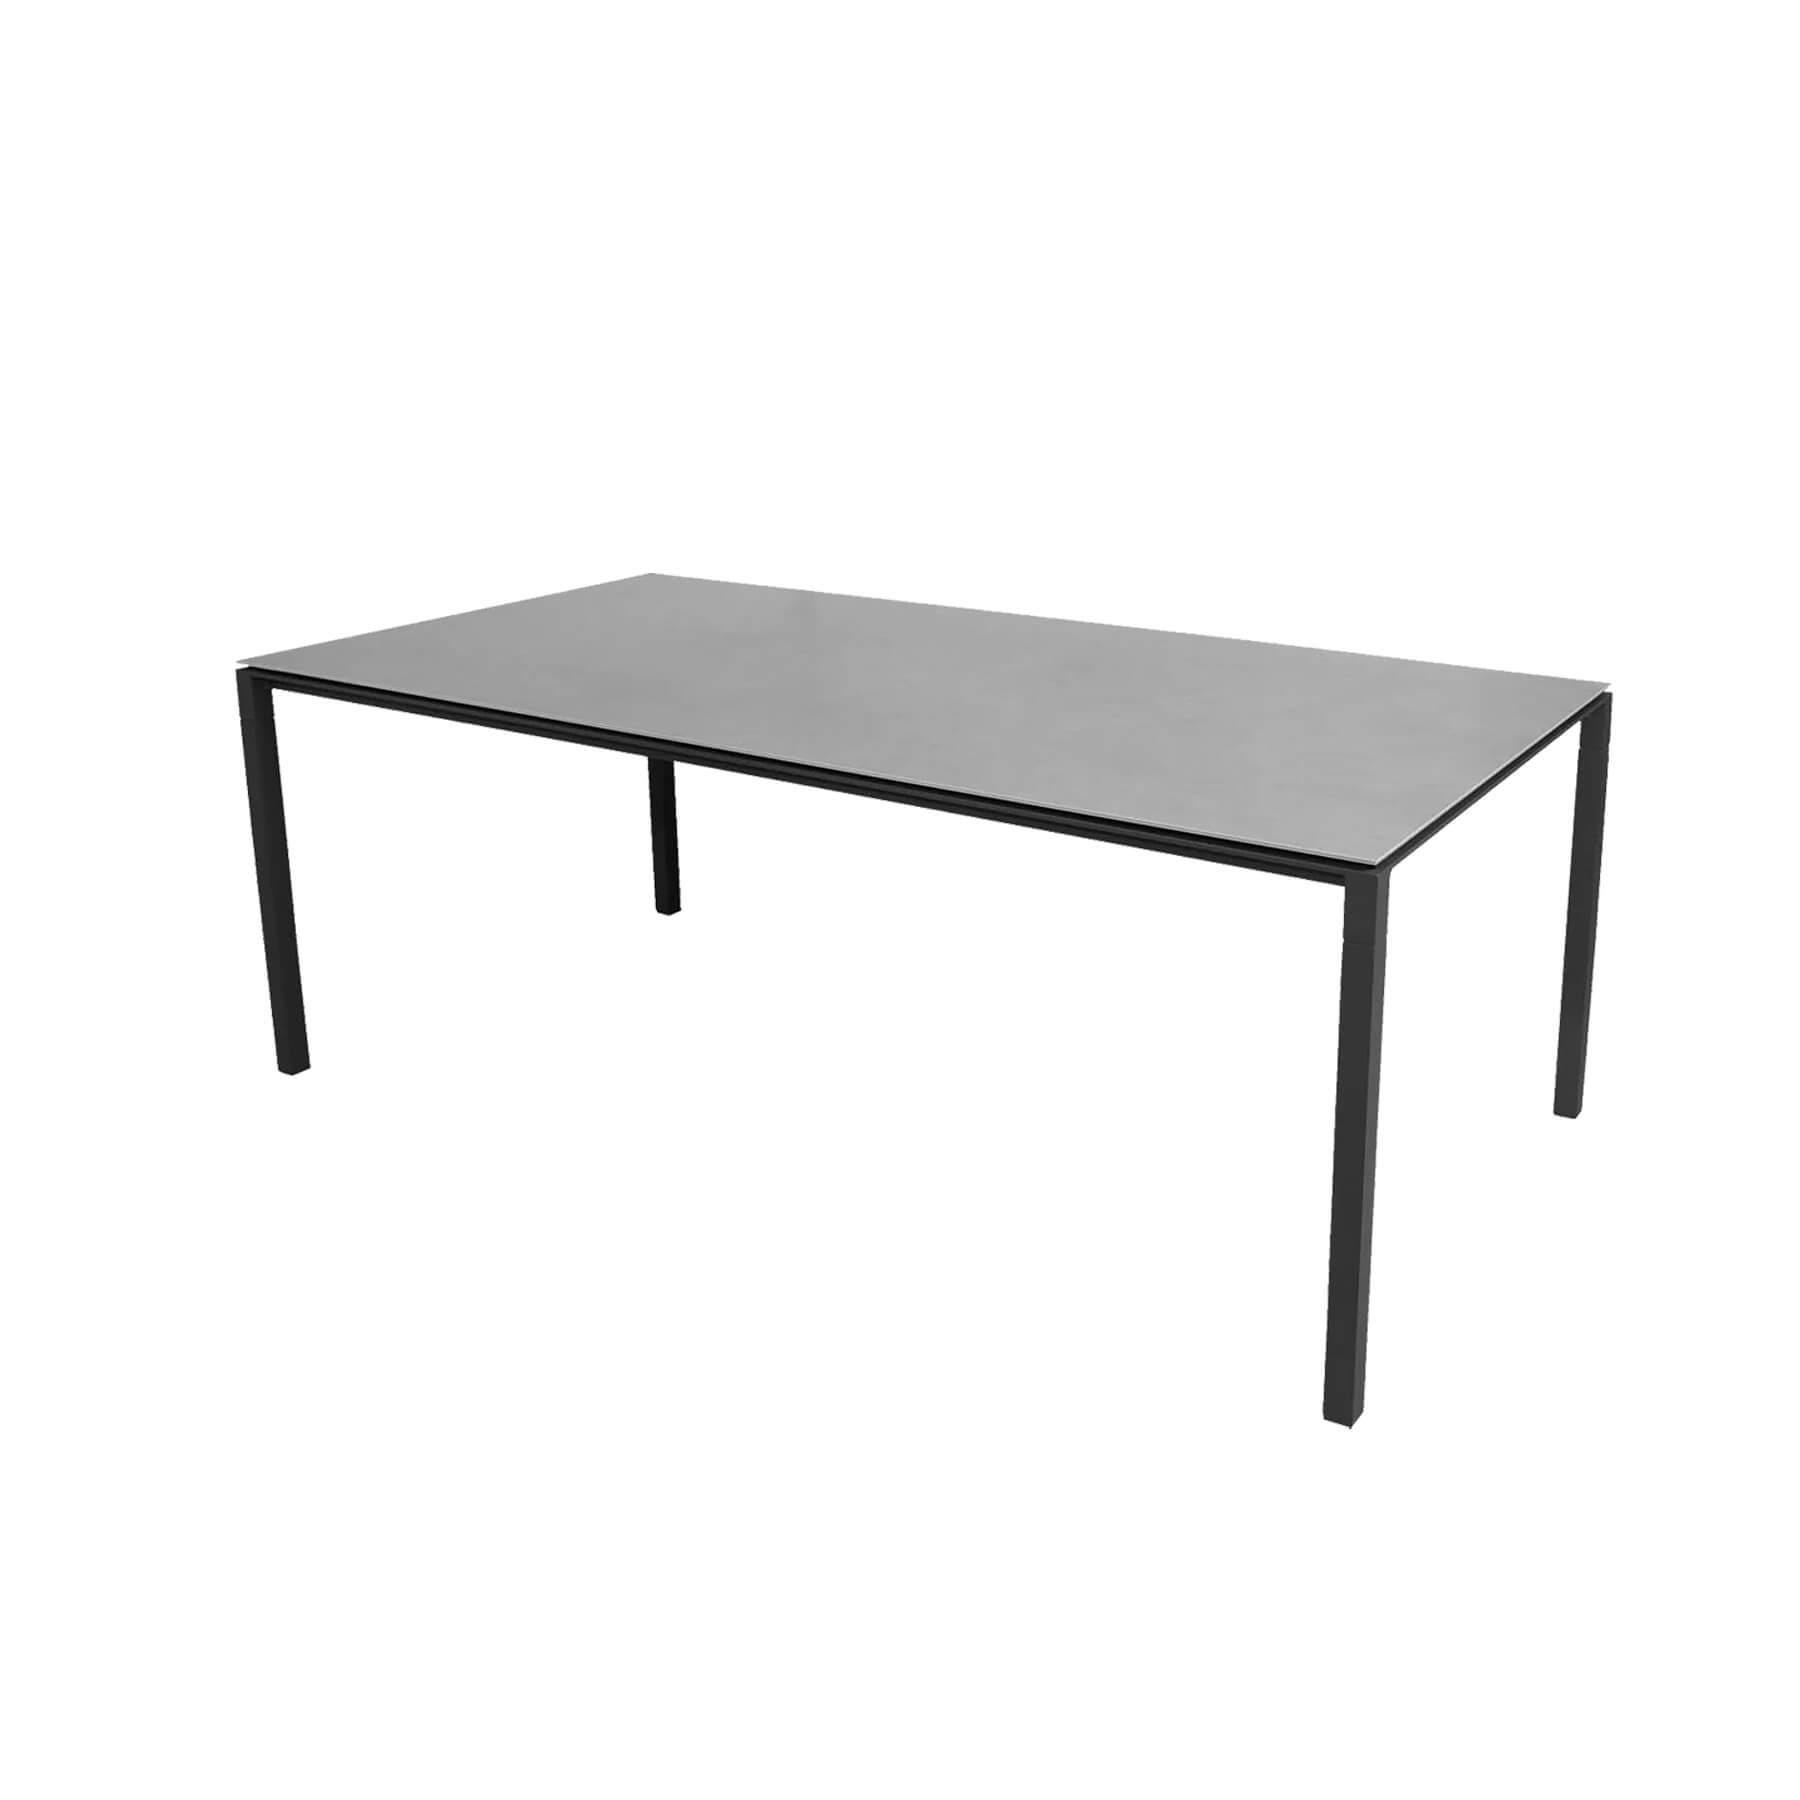 Caneline Pure Outdoor Dining Table Large Ceramic Concrete Grey Top Lava Grey Legs